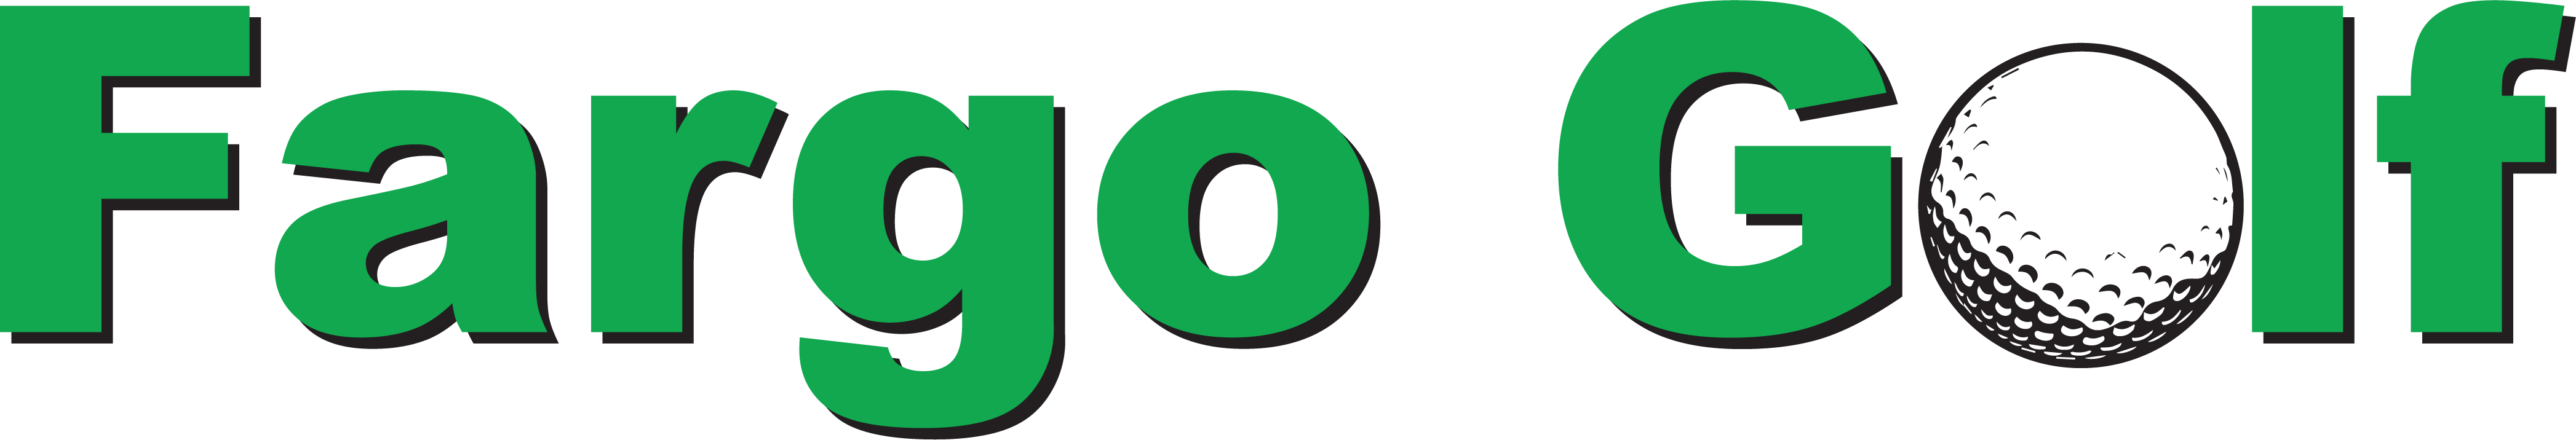 Fargo Golf in green with black shadow and a white golf ball in place of the "O" in golf